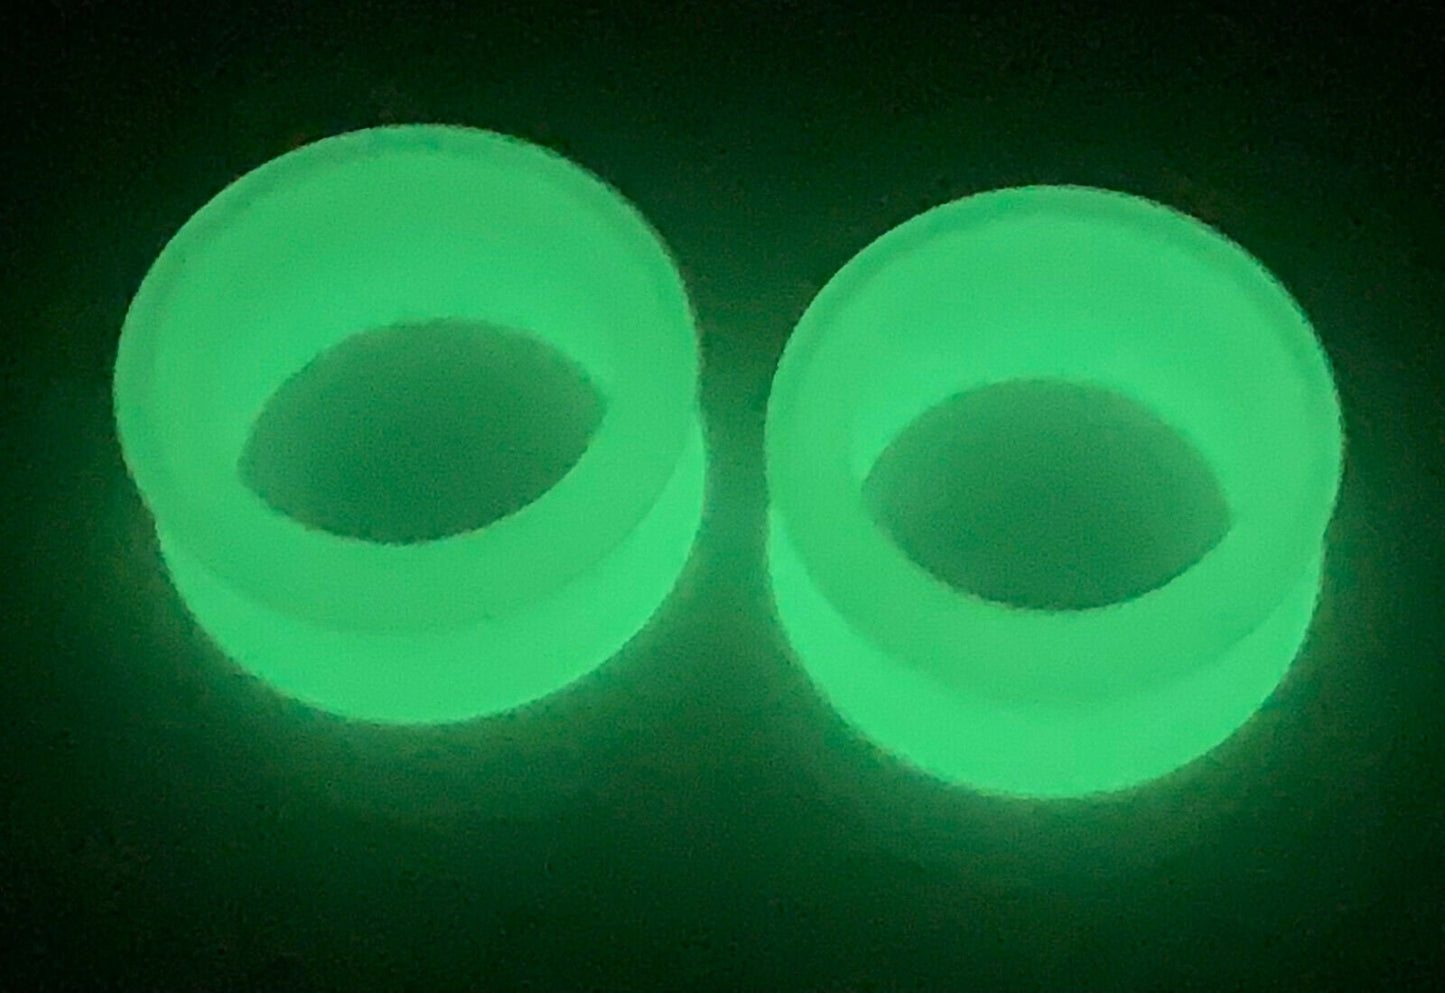 PAIR of Unique Glow in the Dark Silicone Double Flare Tunnels - Gauges 2g (6mm) up to 1" (25mm) available!